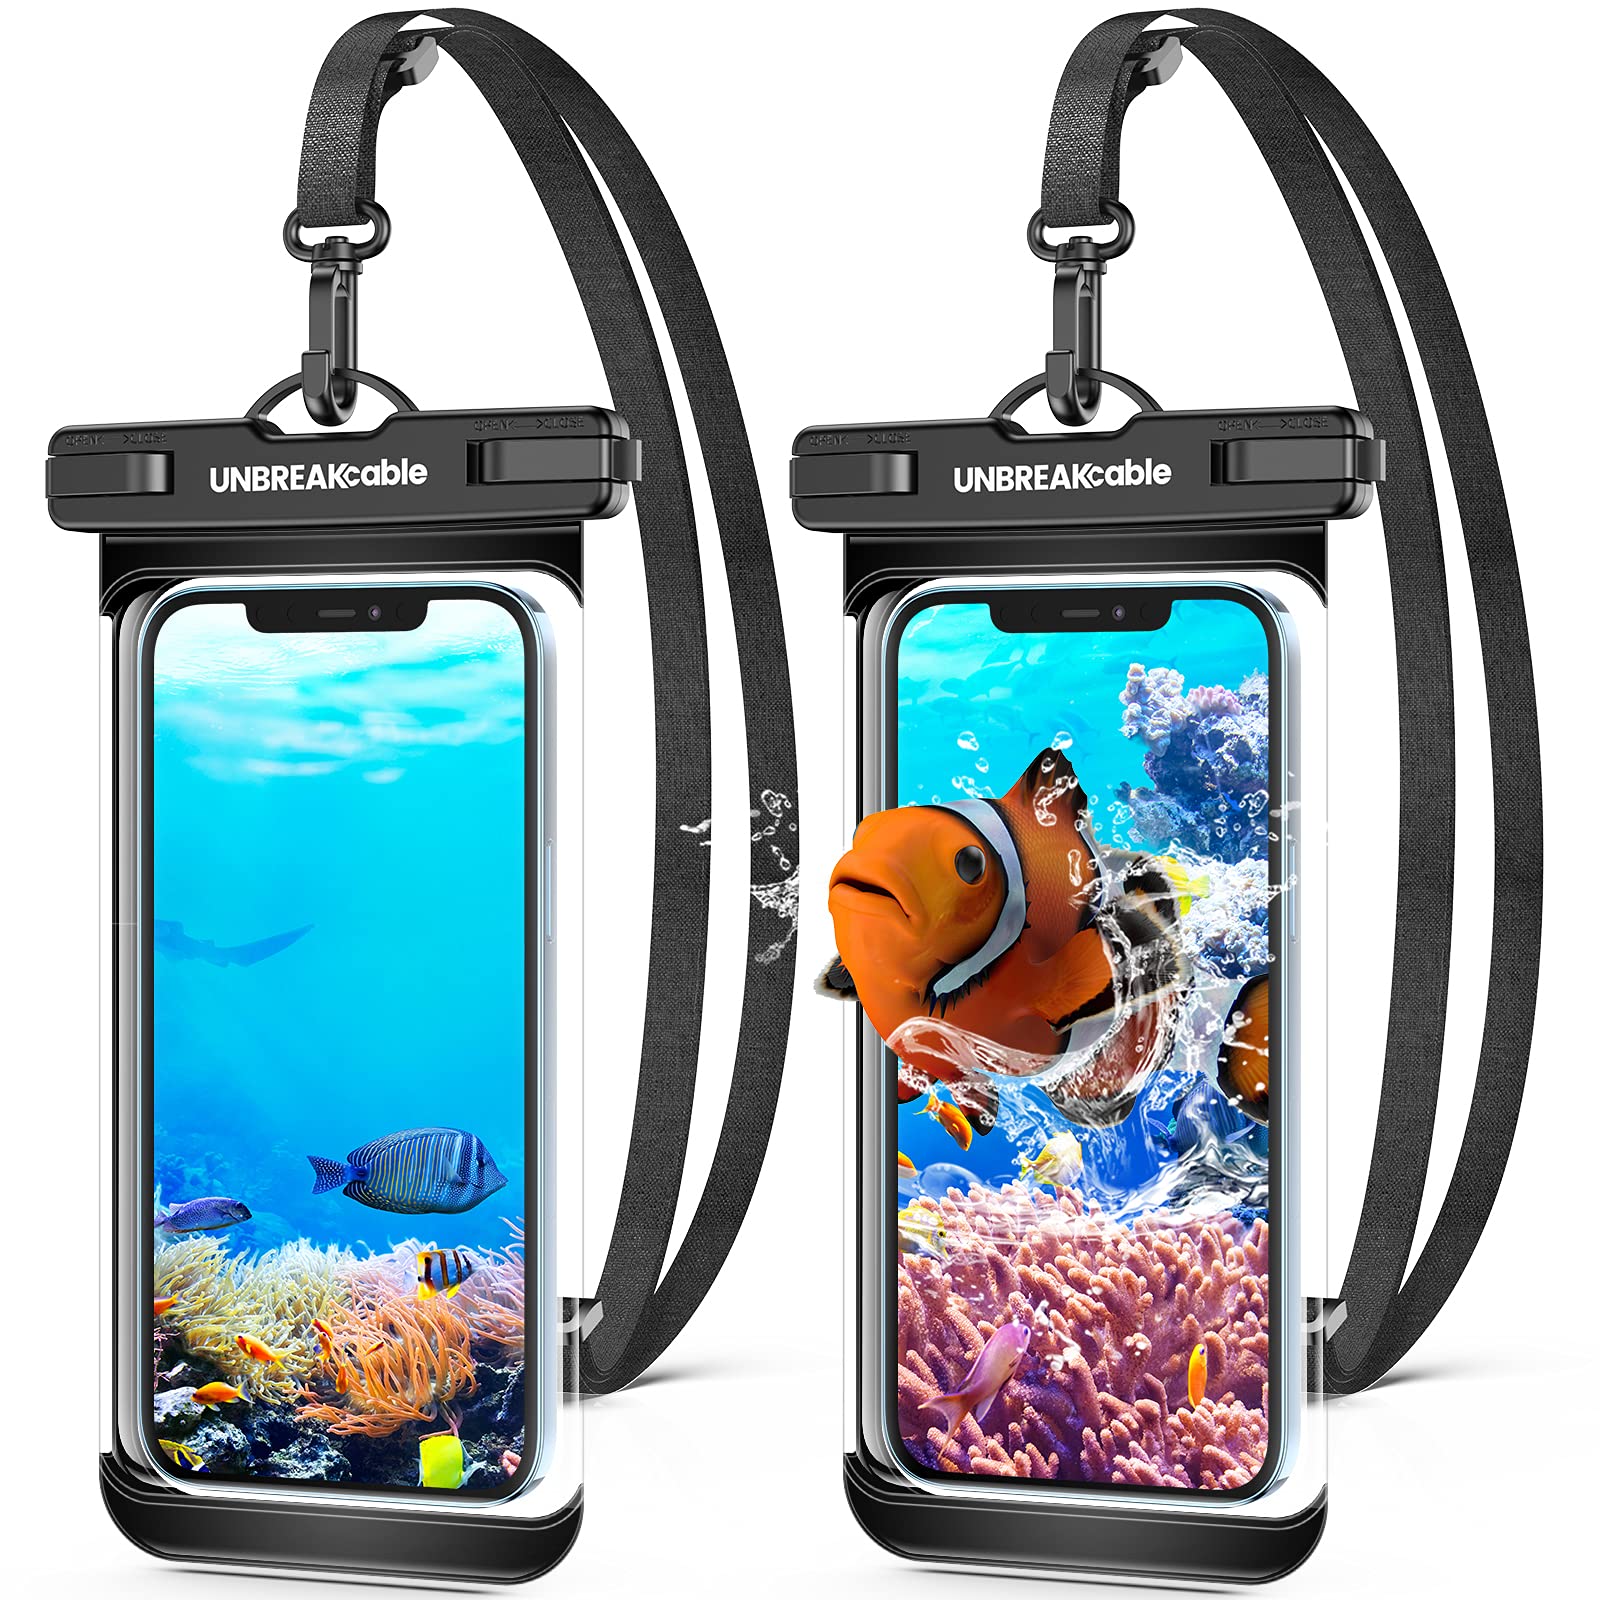 UNBREAKcable Waterproof Phone Case，2-Pack IPX8 Universal Waterproof Phone Pouch Dry Bag for iPhone 13 12 11 Pro Max XR X XS SE 2020 8 Plus Samsung S22 Ultra S21 S10 S9 Huawei P40 P20 Mate 40 up to 7"